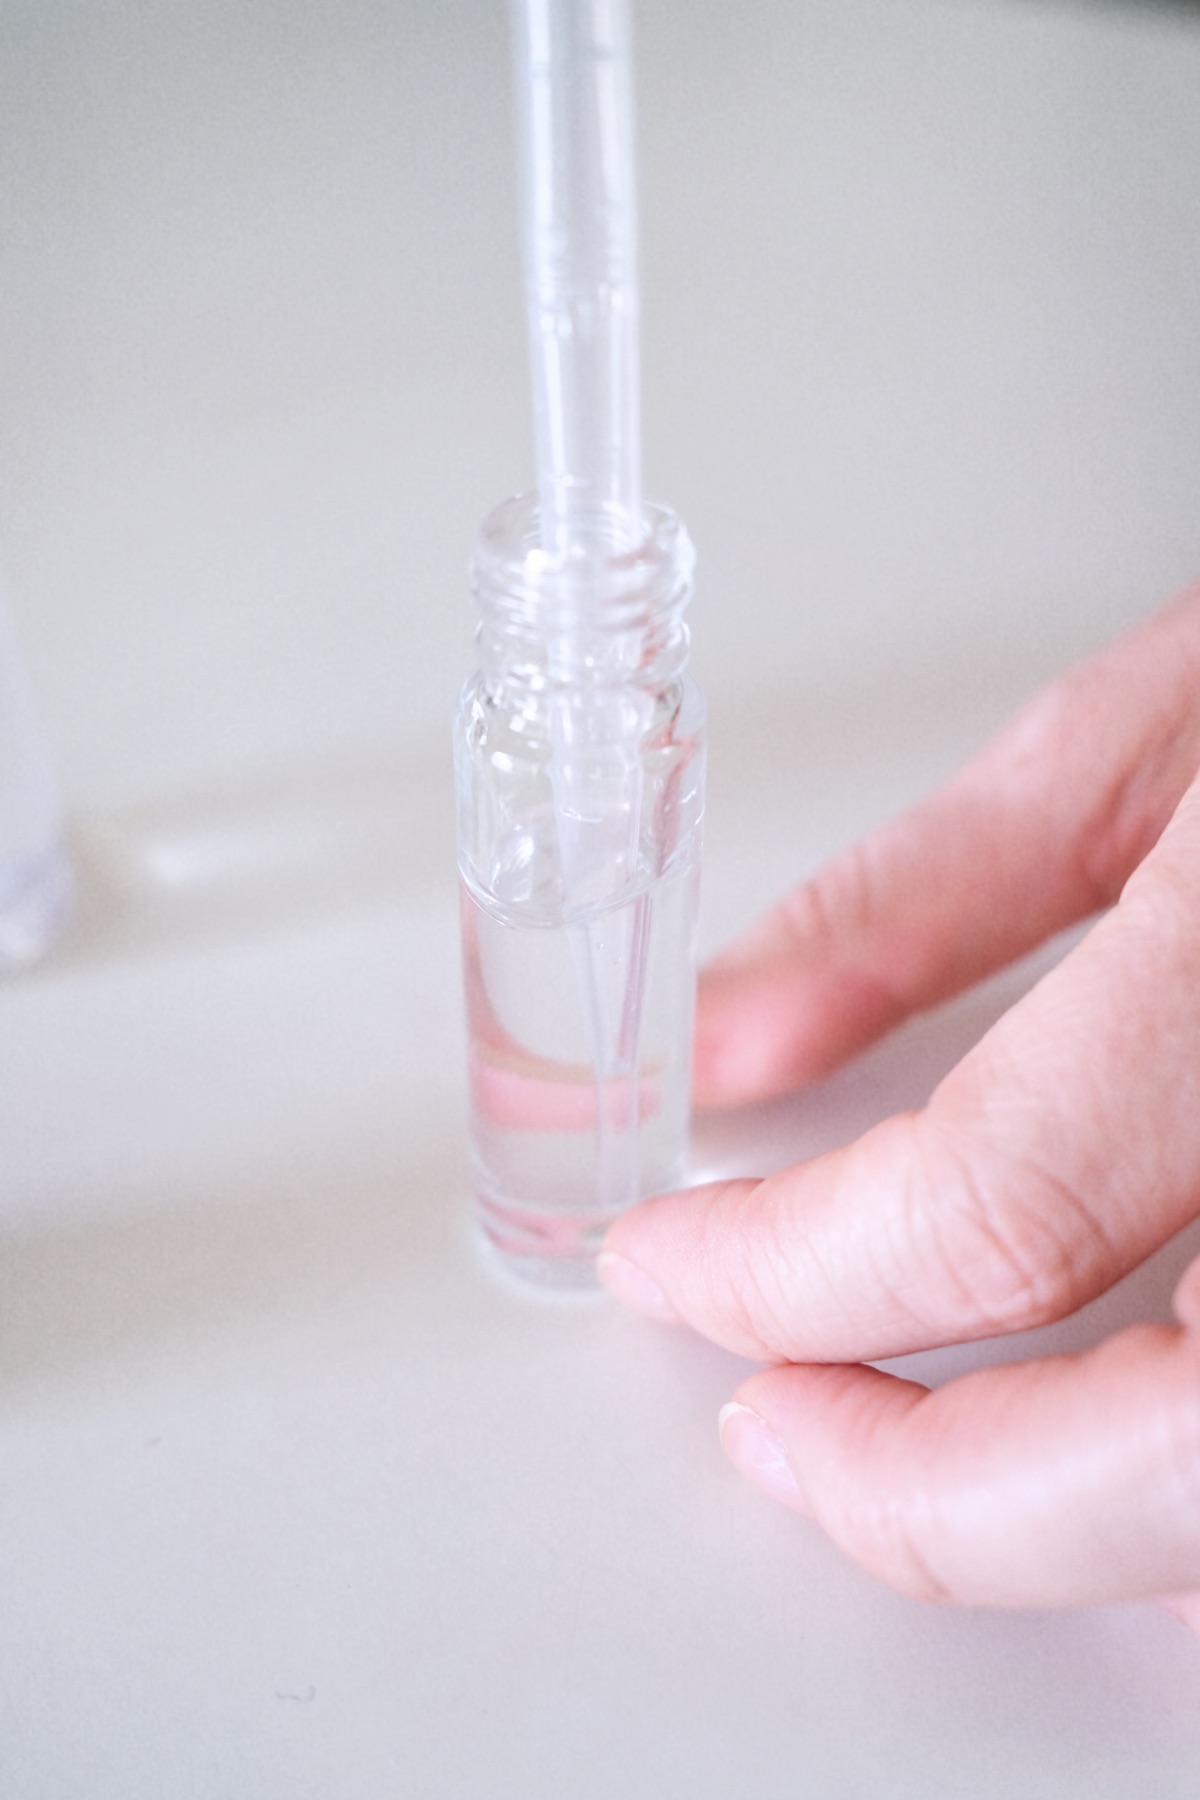 use a pipette to mix in the flavoring